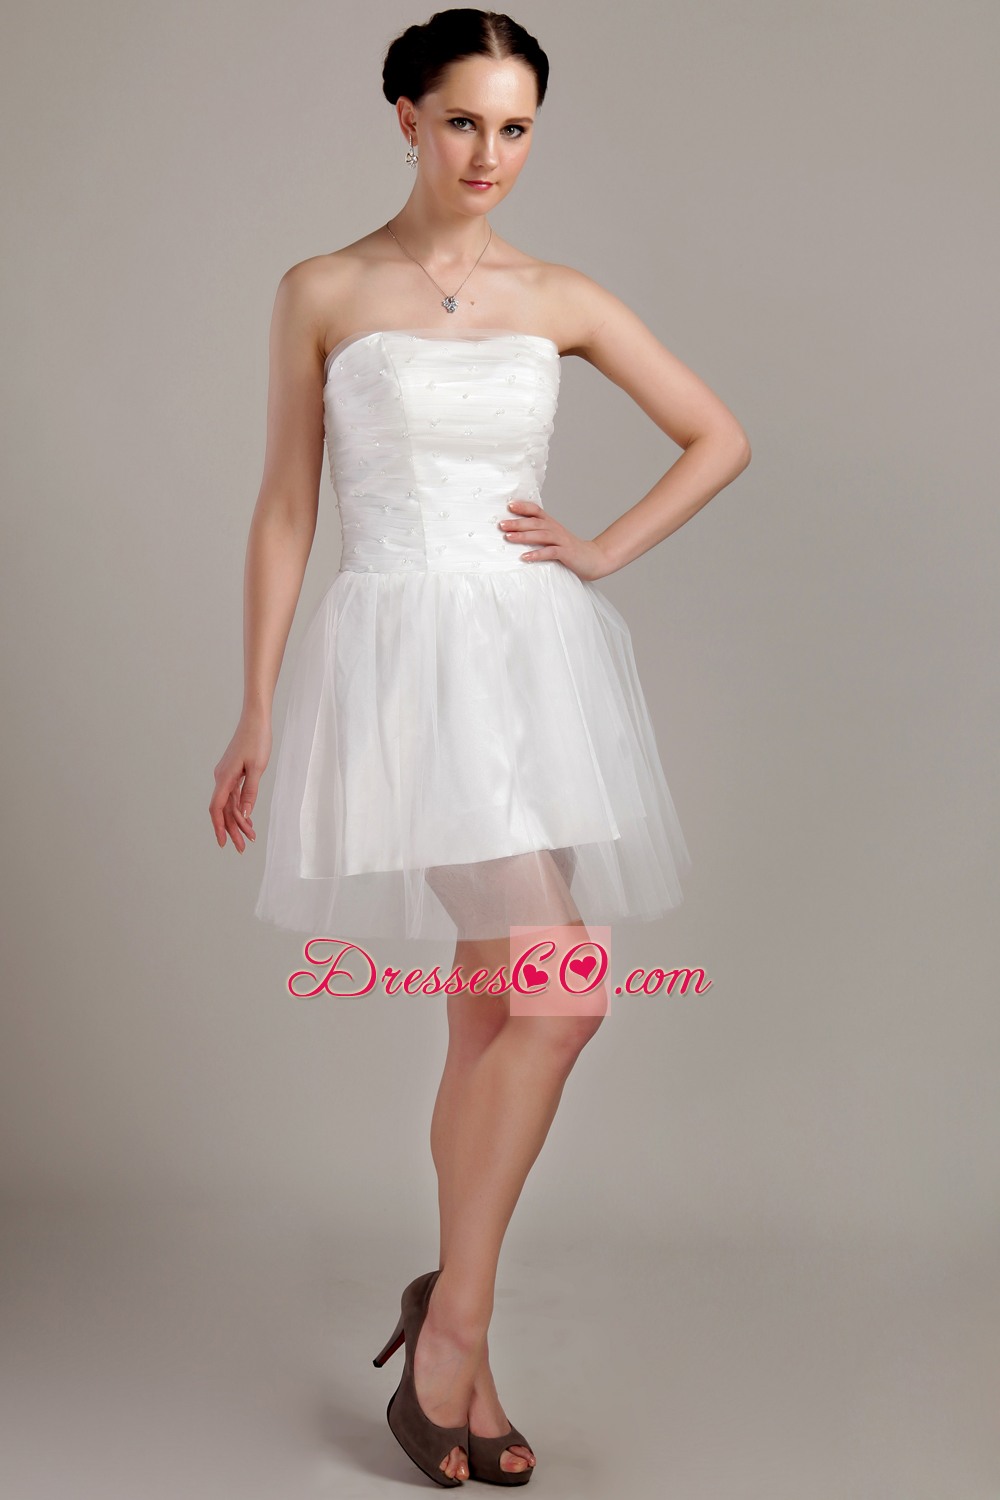 White A-line / Princess Strapless Mini-length Organza Beading And Ruched Wedding Dress